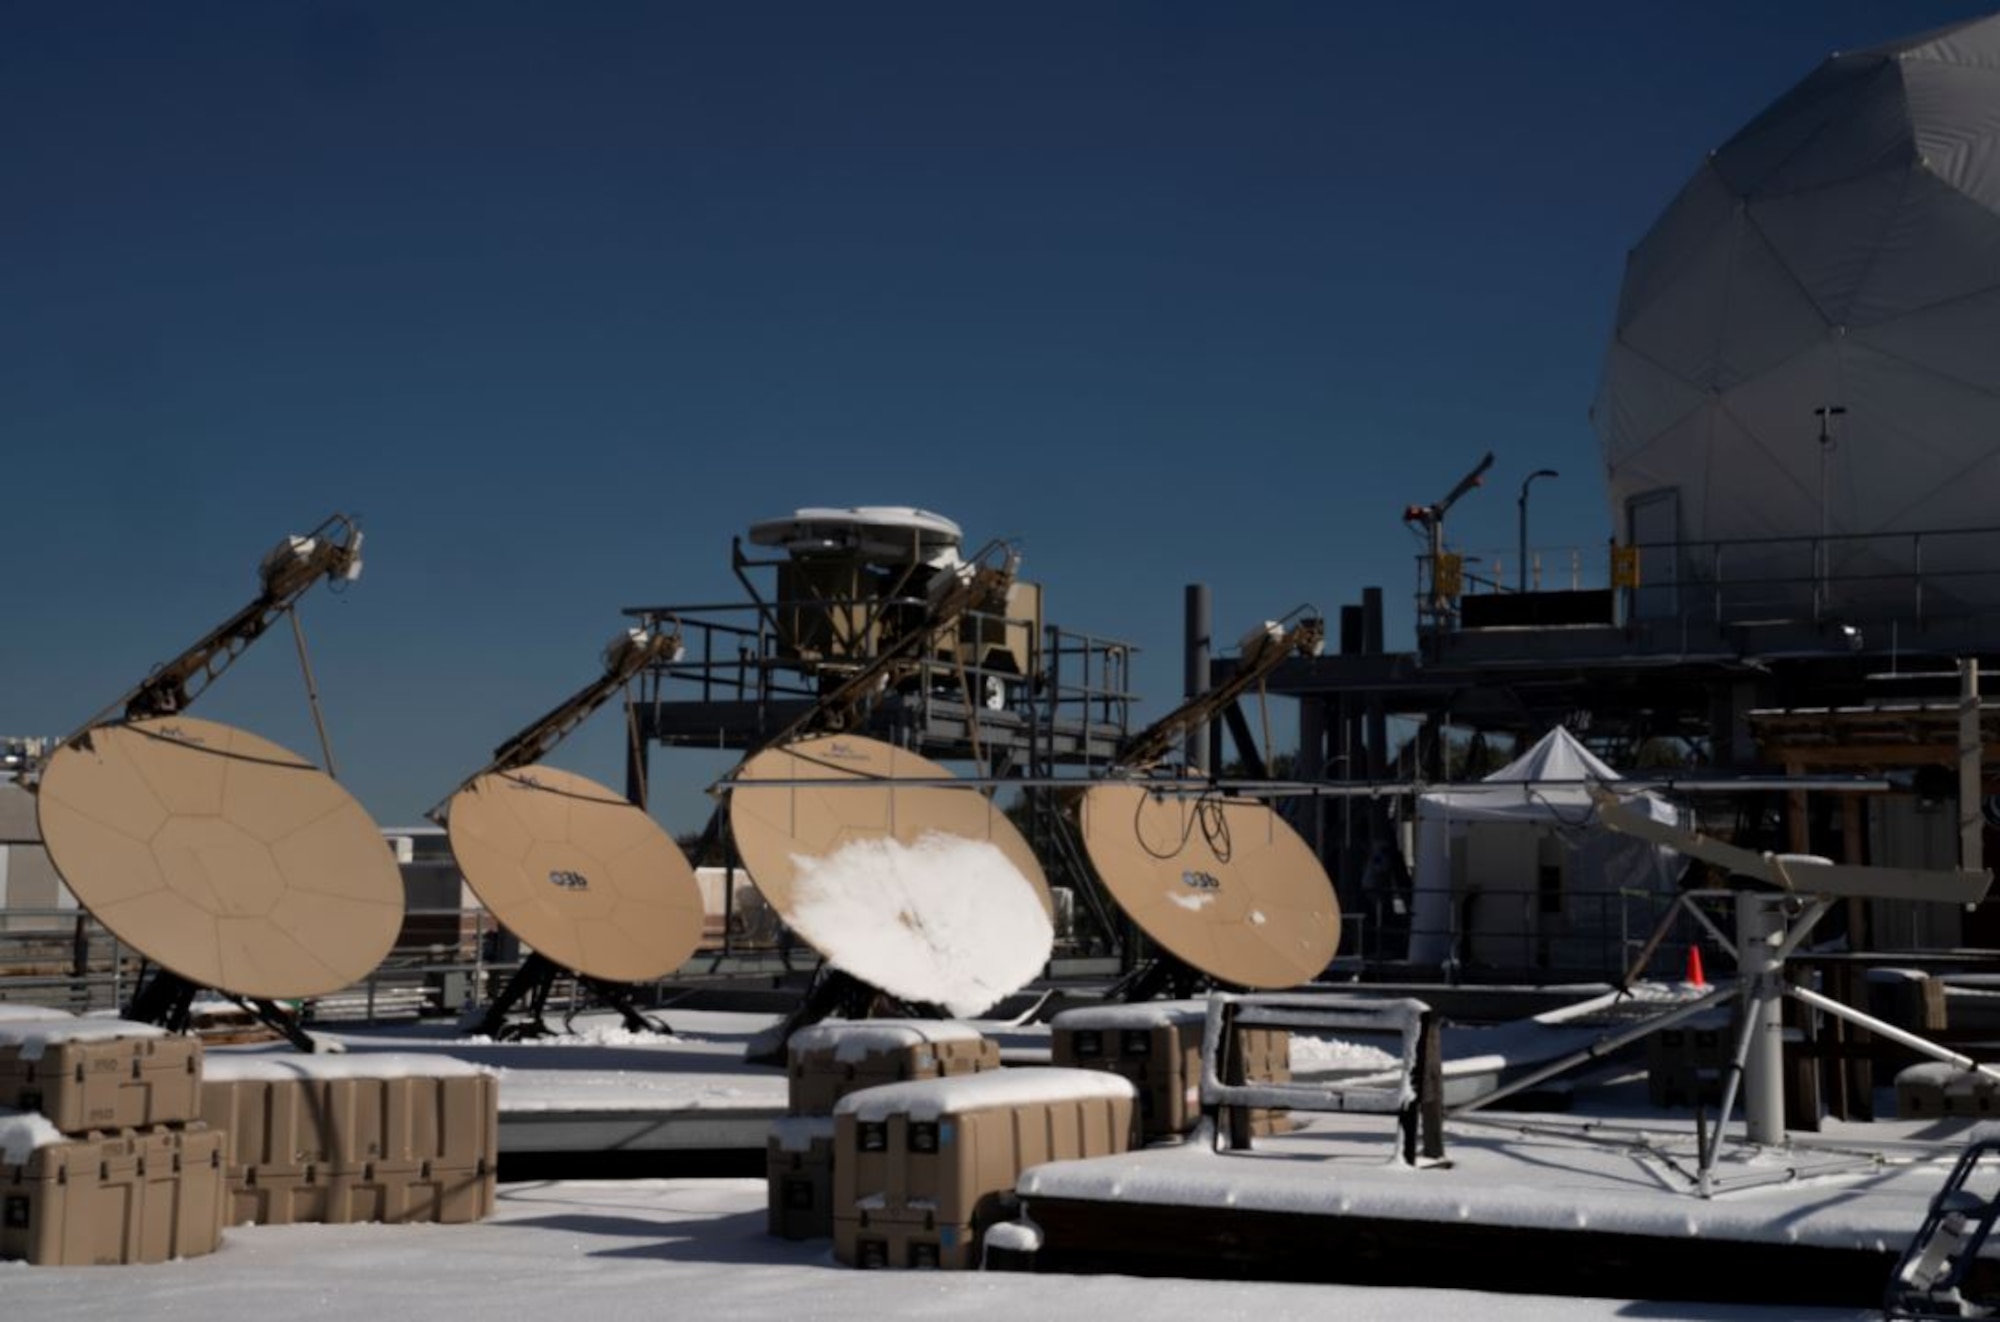 AvL MEO tracking antennas, provided by SES are shown operating at MIT Lincoln Laboratory in support of the PTW O3b test. (Photo courtesy of MIT Lincoln Laboratory)